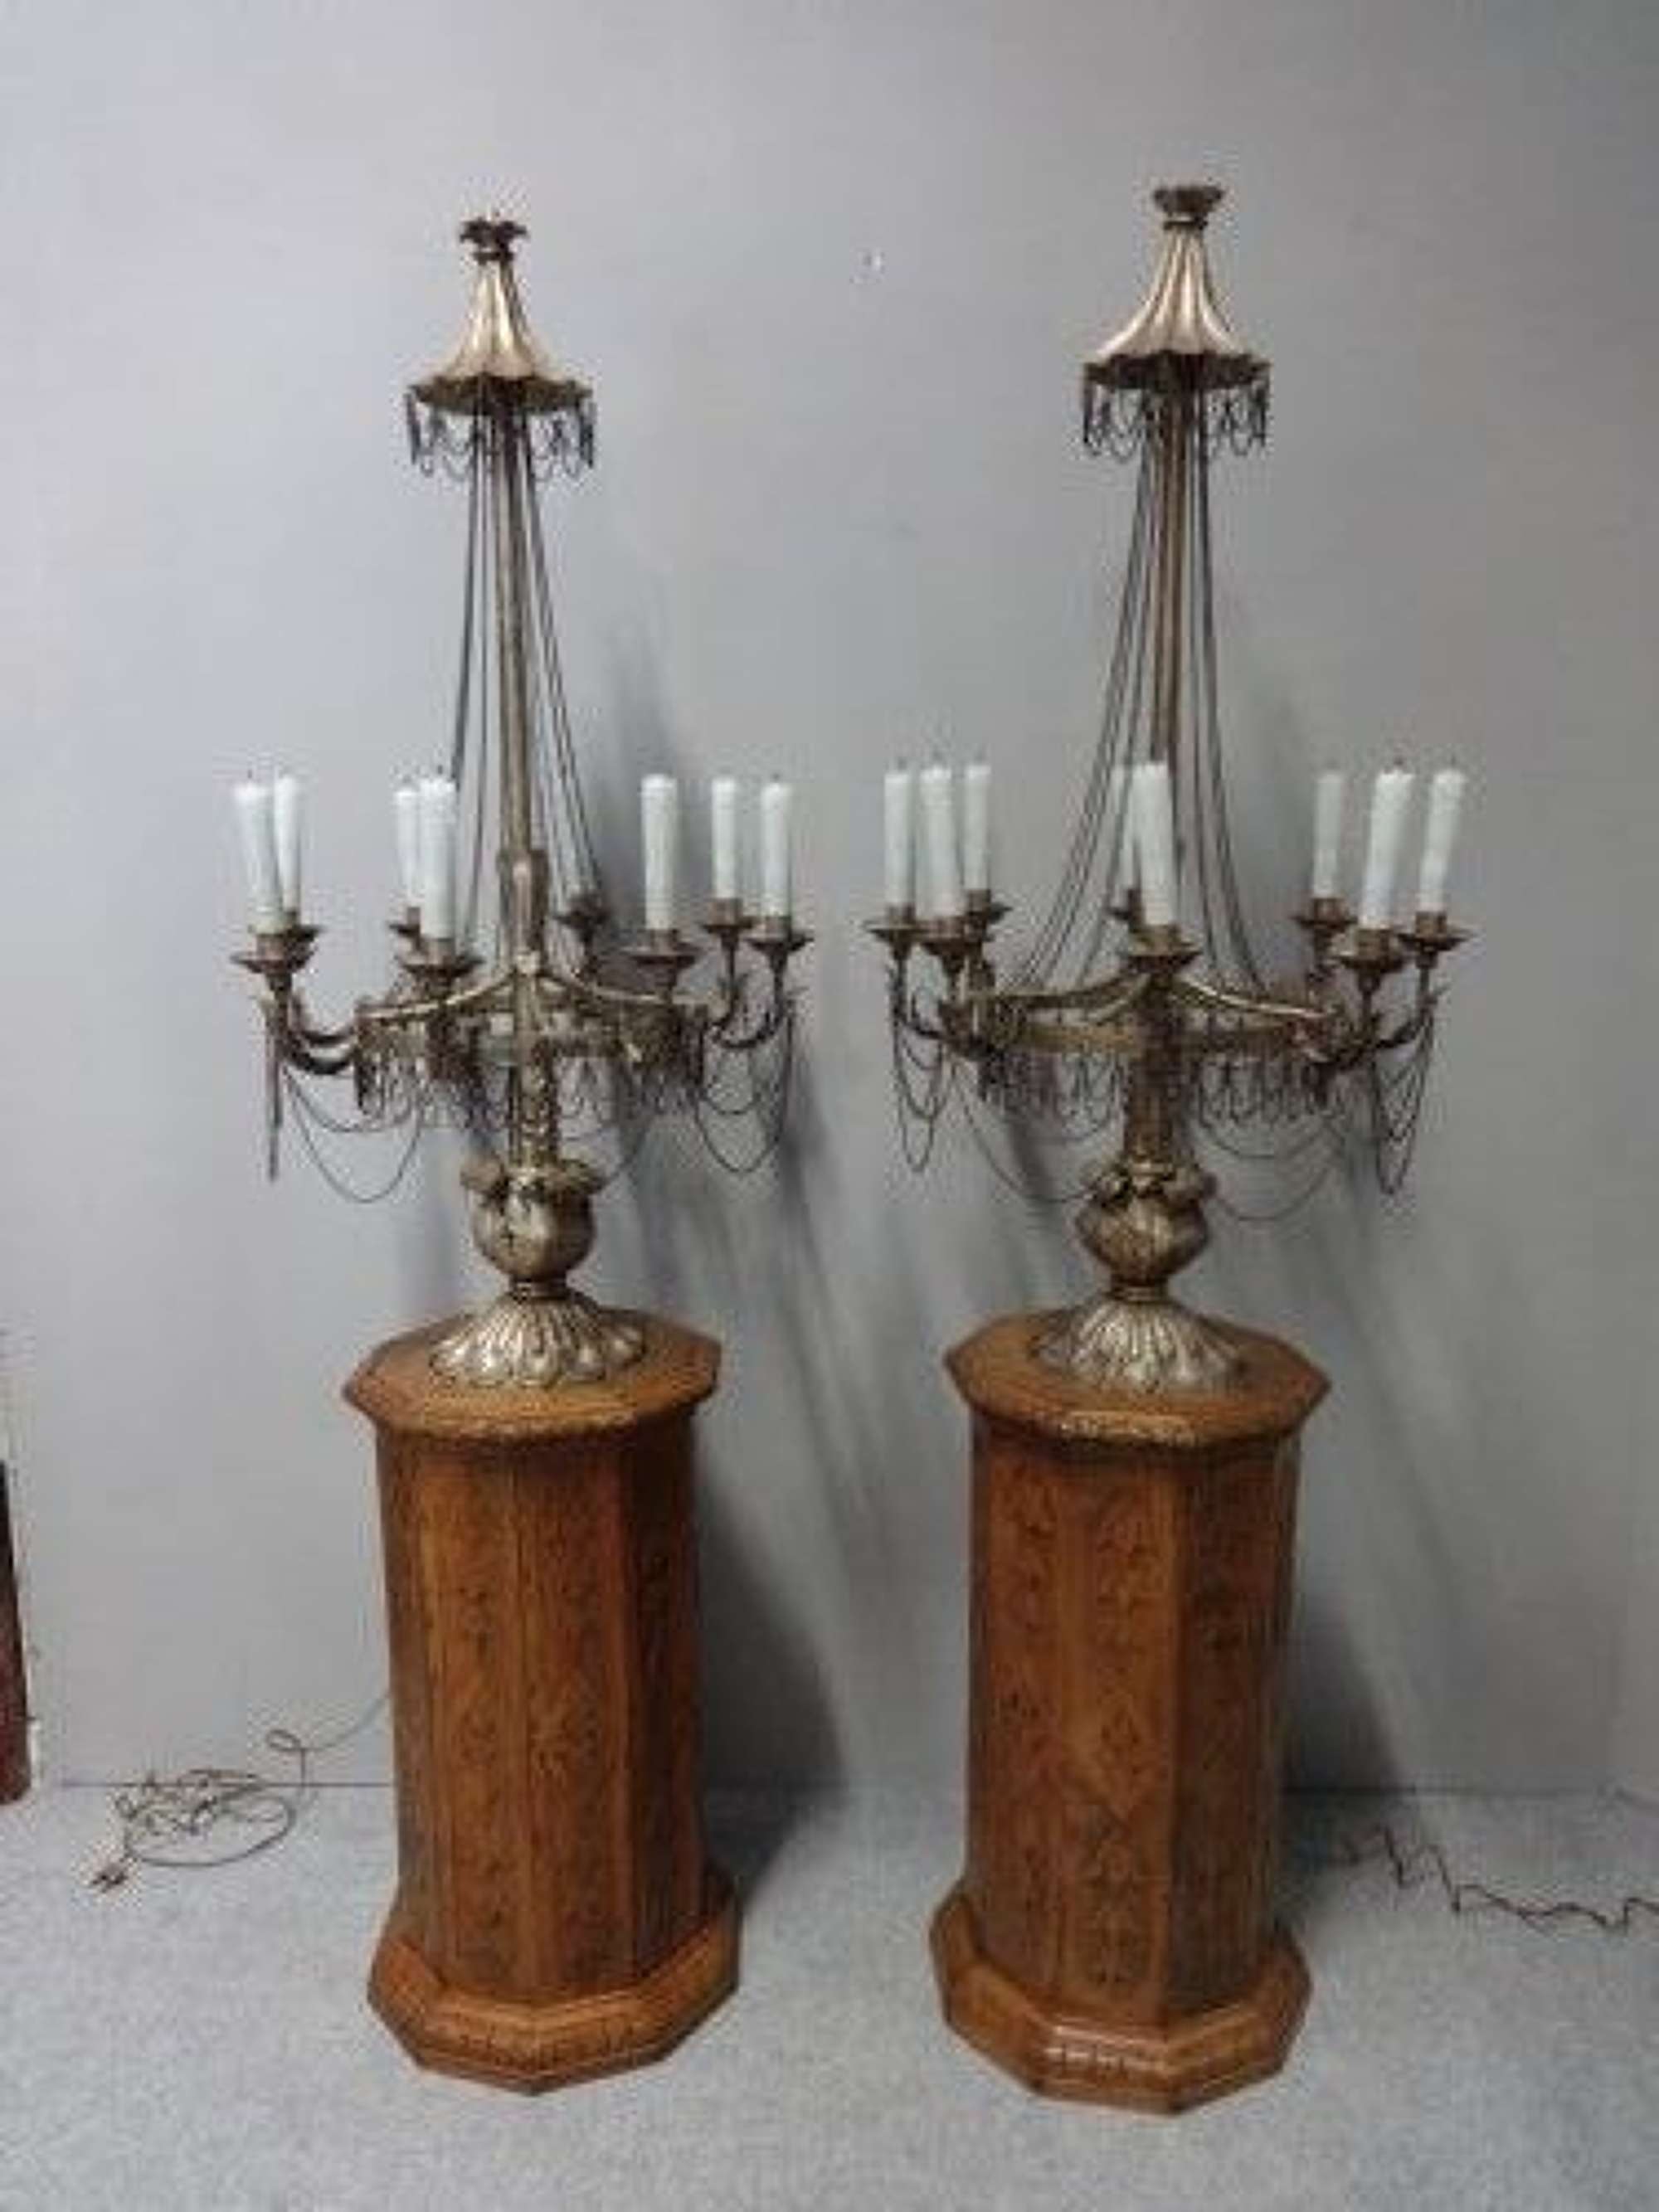 Superb Pair Gilt Metal Electrolier Lamps, With Provenance